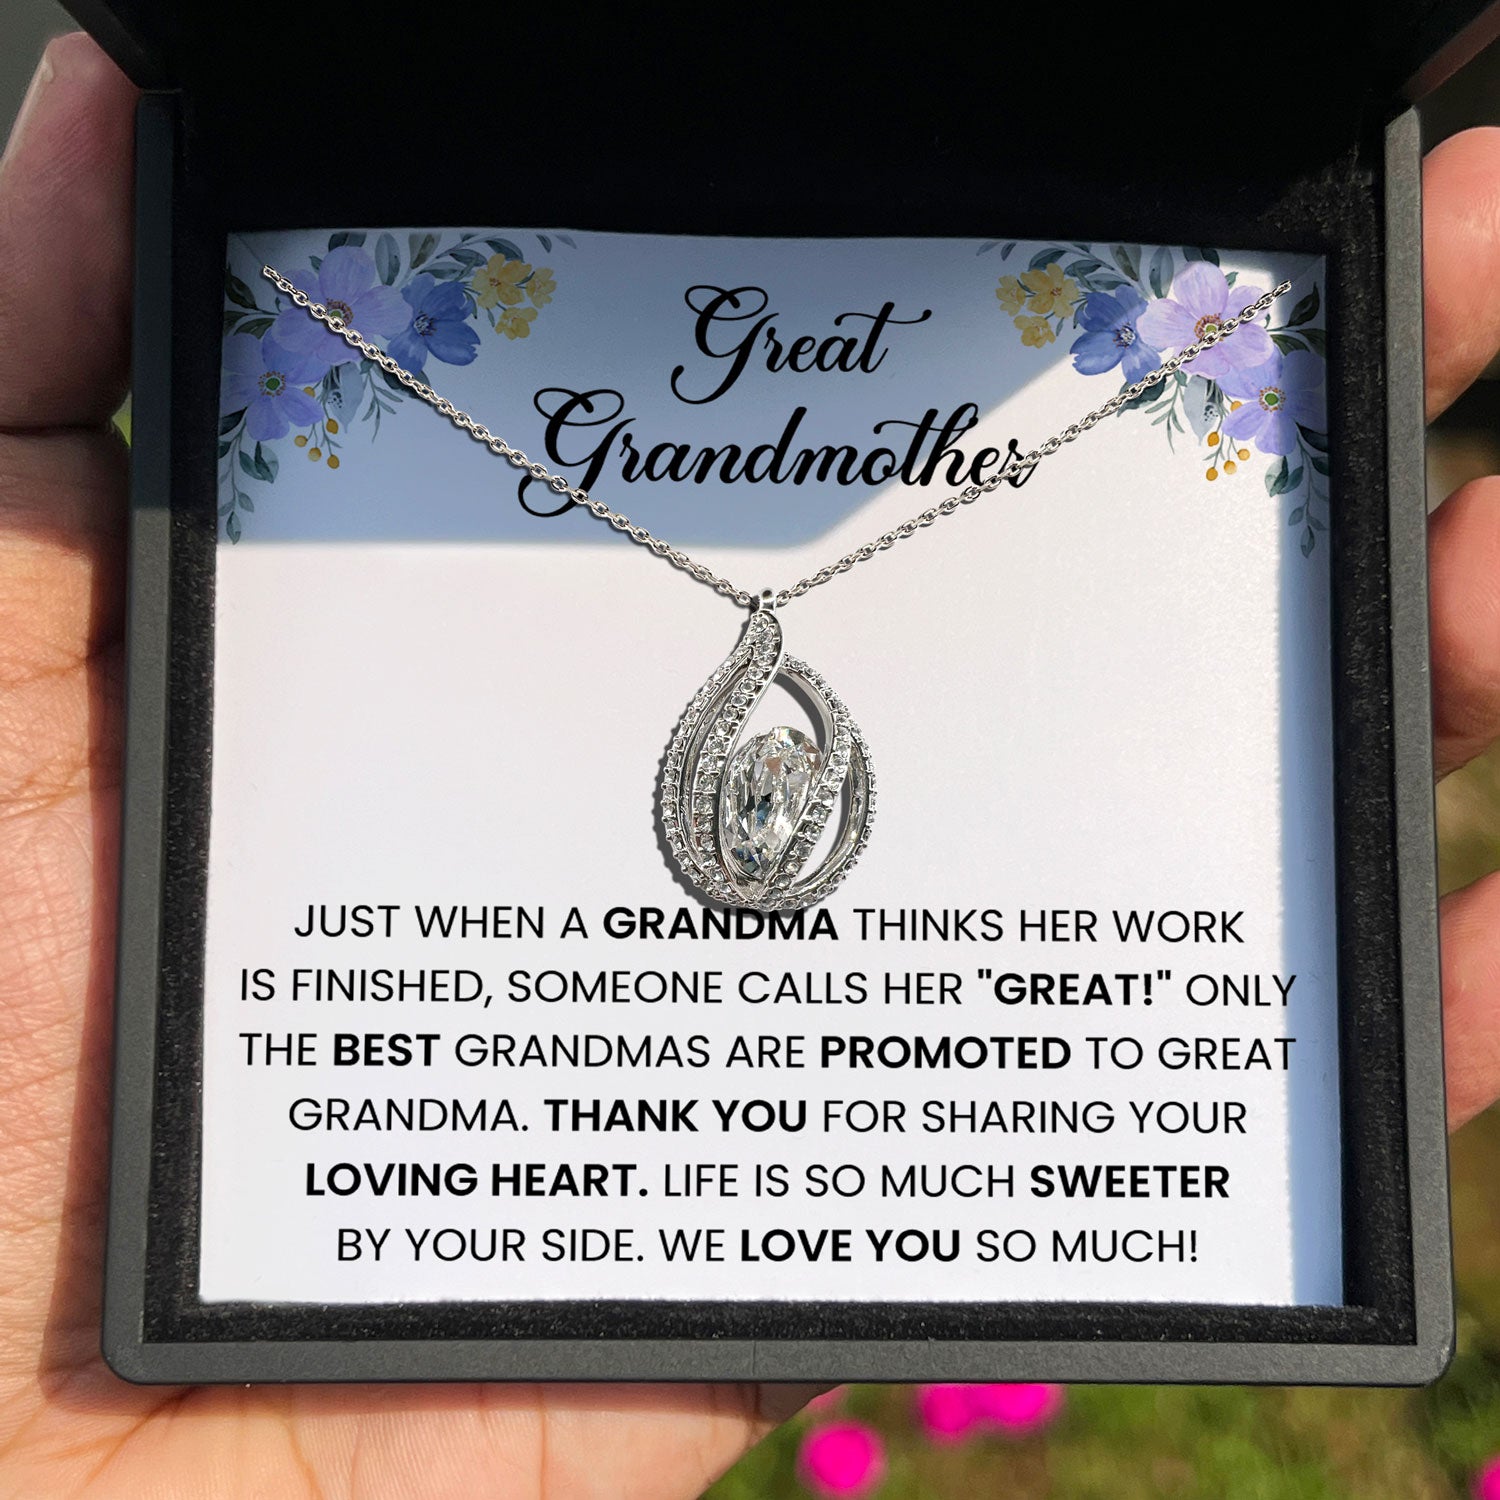 To My Great Grandmother - Thank You For Sharing Your Loving Heart - Orbital Birdcage Necklace